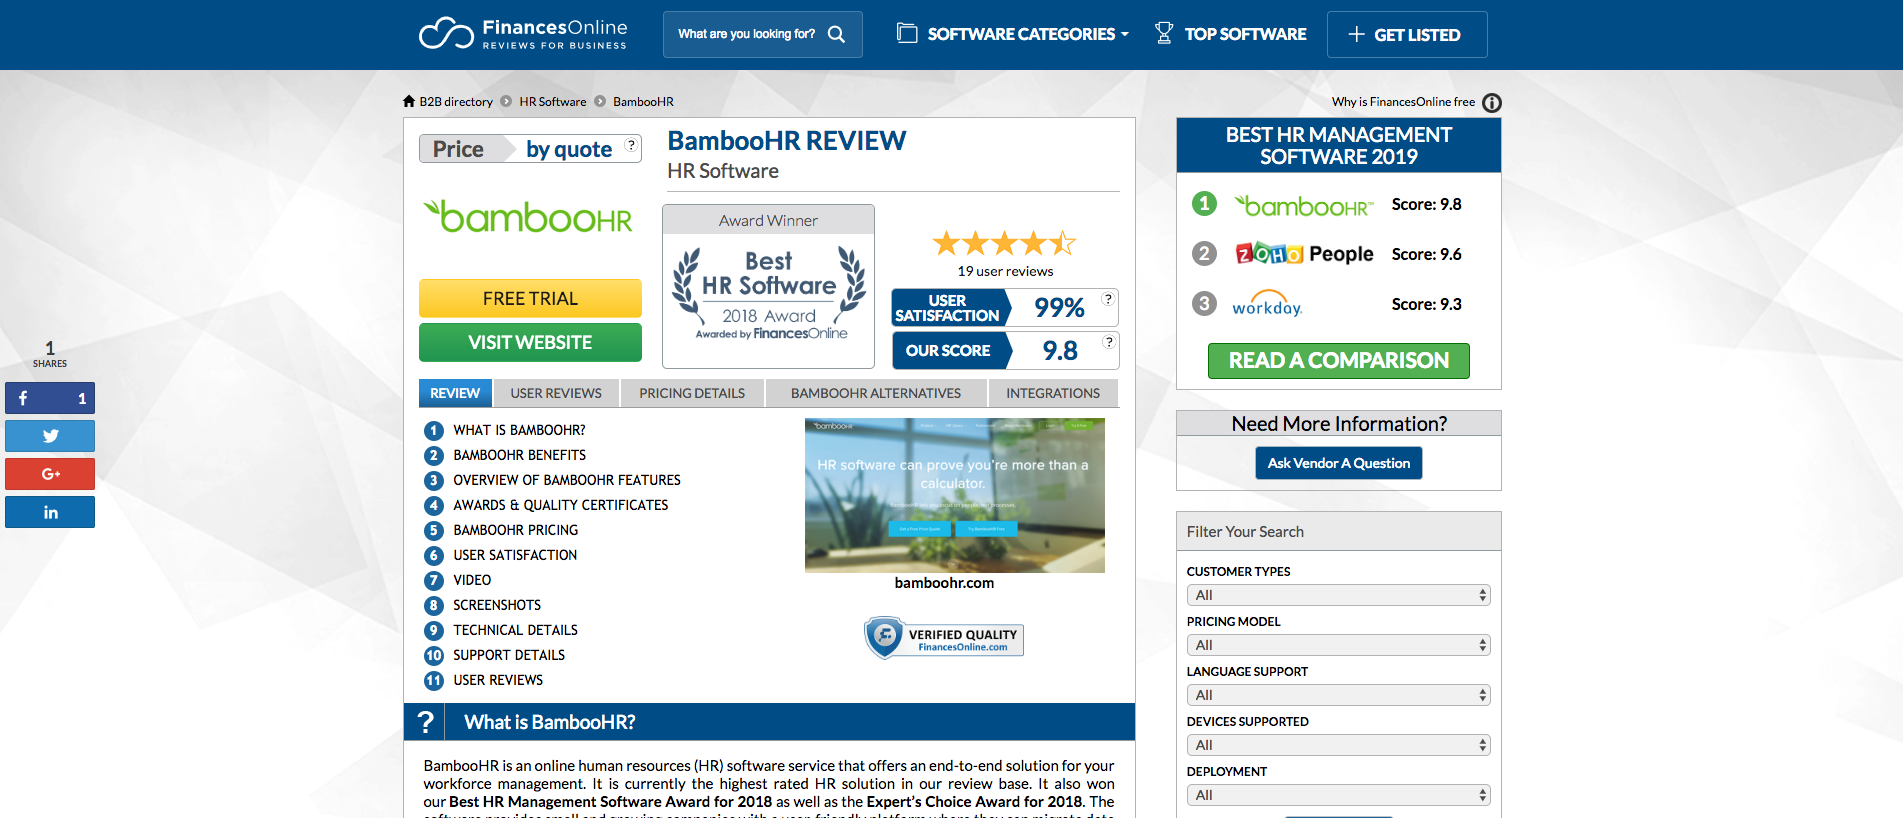 Screenshot of the FinancesOnline interface showcasing the BambooHR review page.